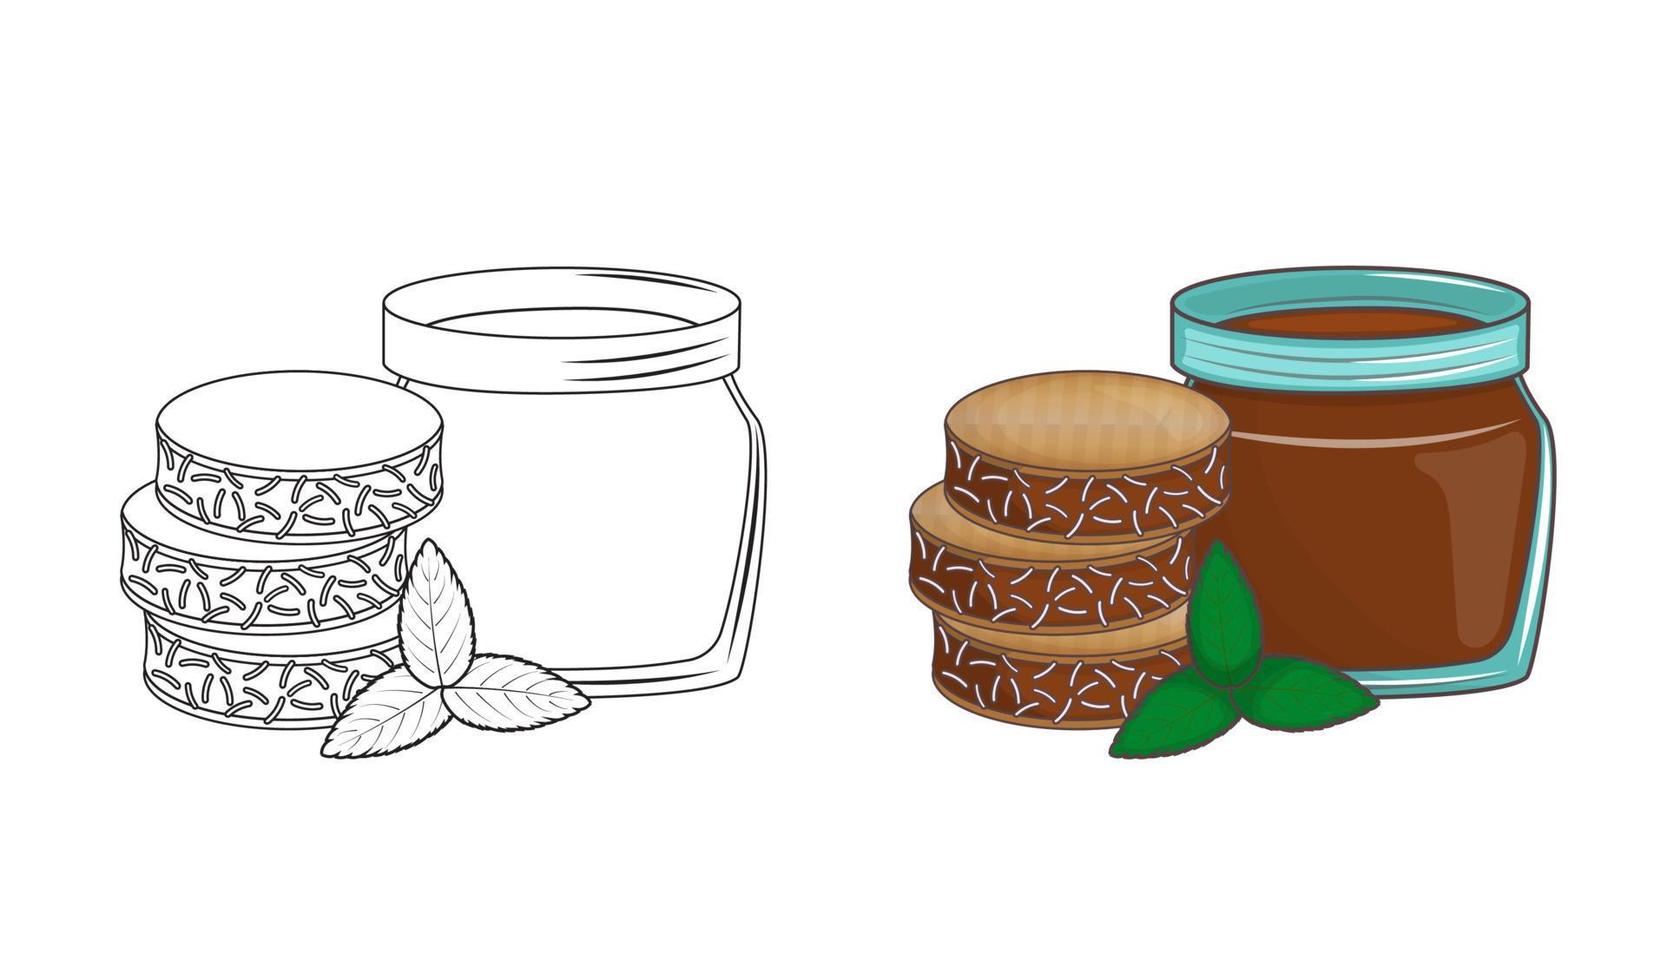 Argentina's dessert is Alfajores. Kids coloring book for elementary school. Traditional cuisine. Latin American pastries - round cookies. Vector illustration. Cartoon.